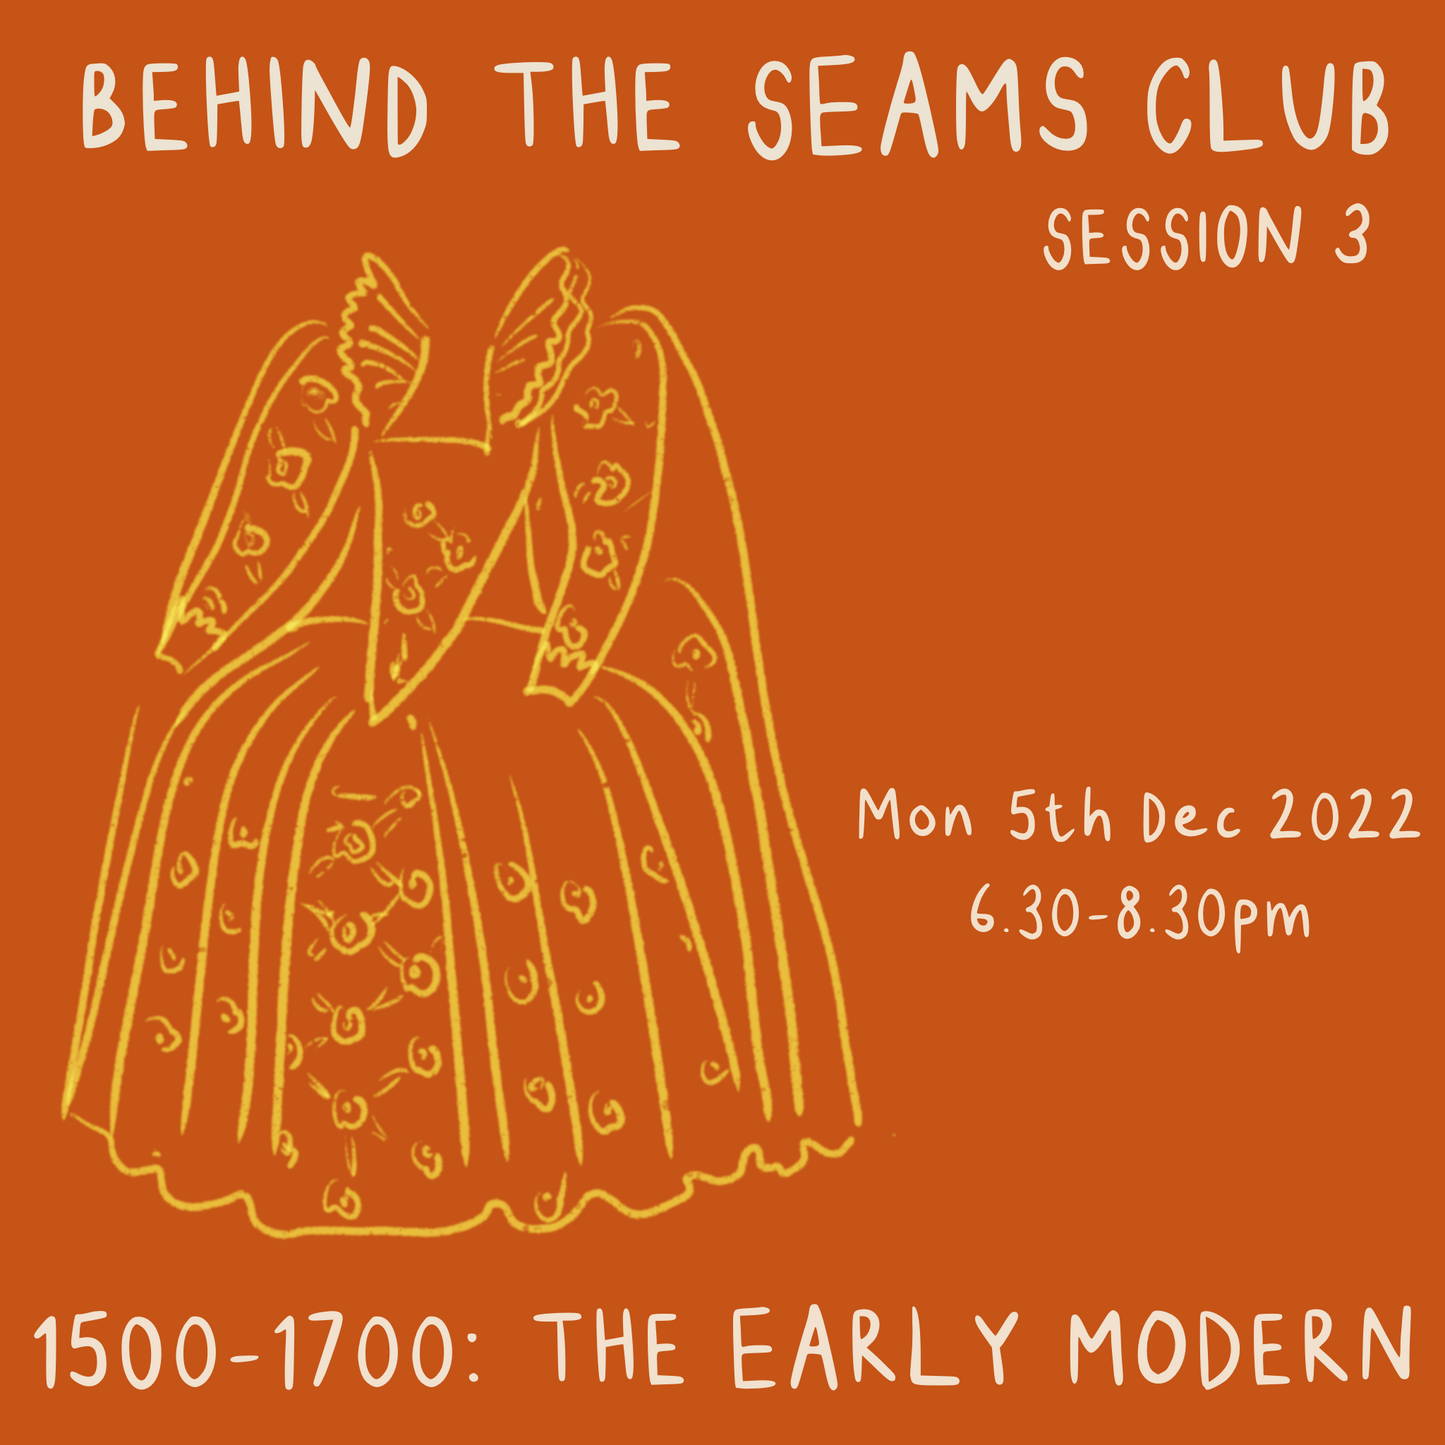 Behind The Seams Club Session 3 Mon 5th Dec 2022: The Early Modern *DROP IN*